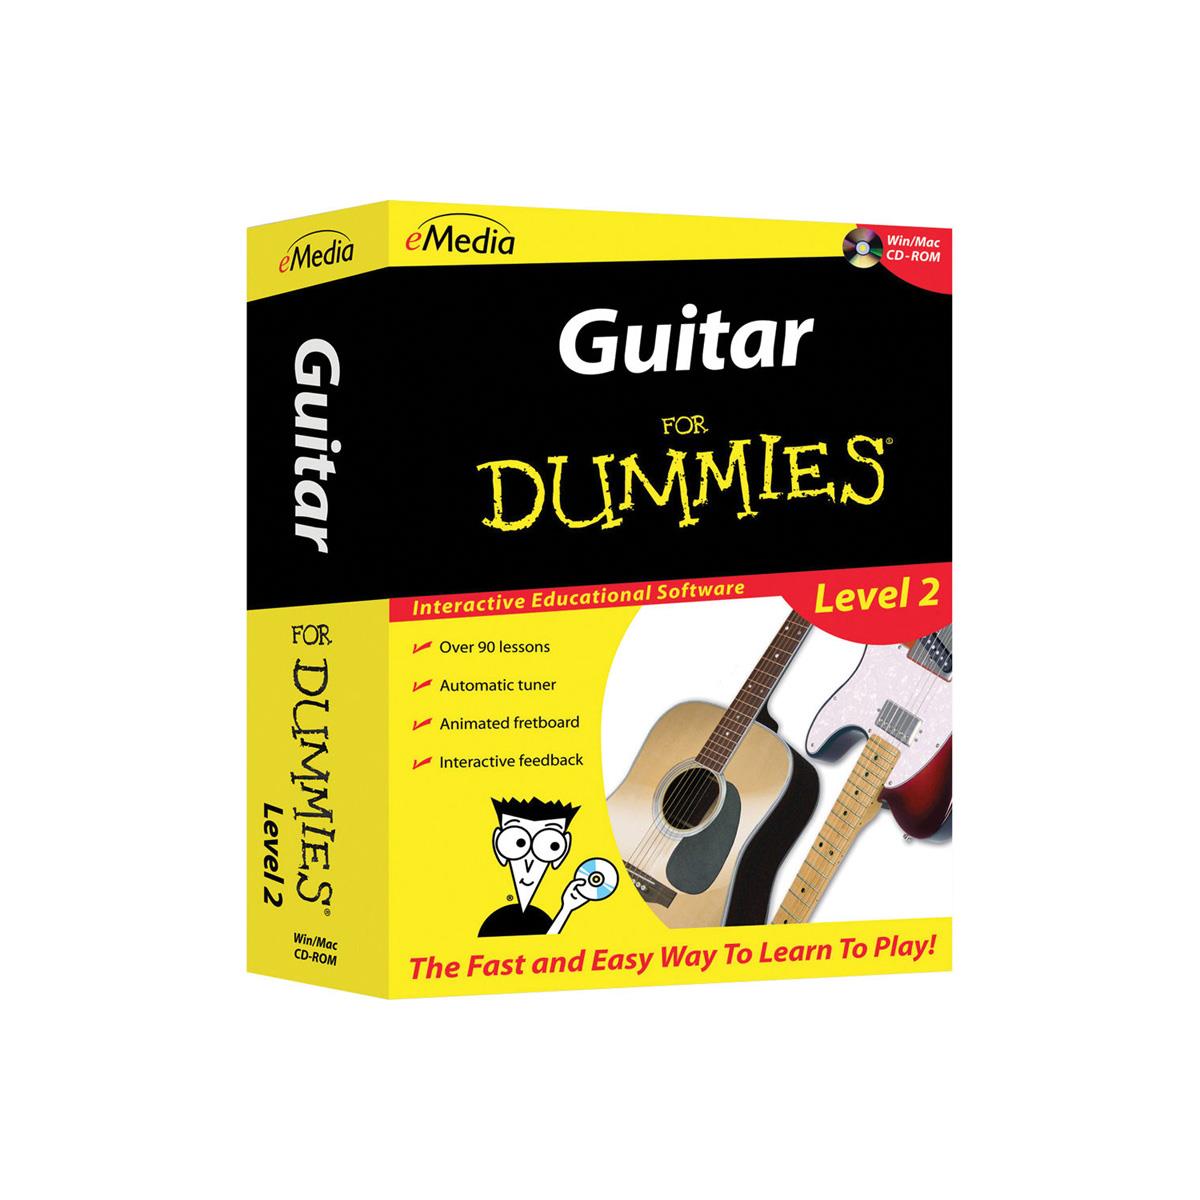 eMedia Guitar For Dummies Level 2 Software for Windows, Electronic Download -  FD09107DLW